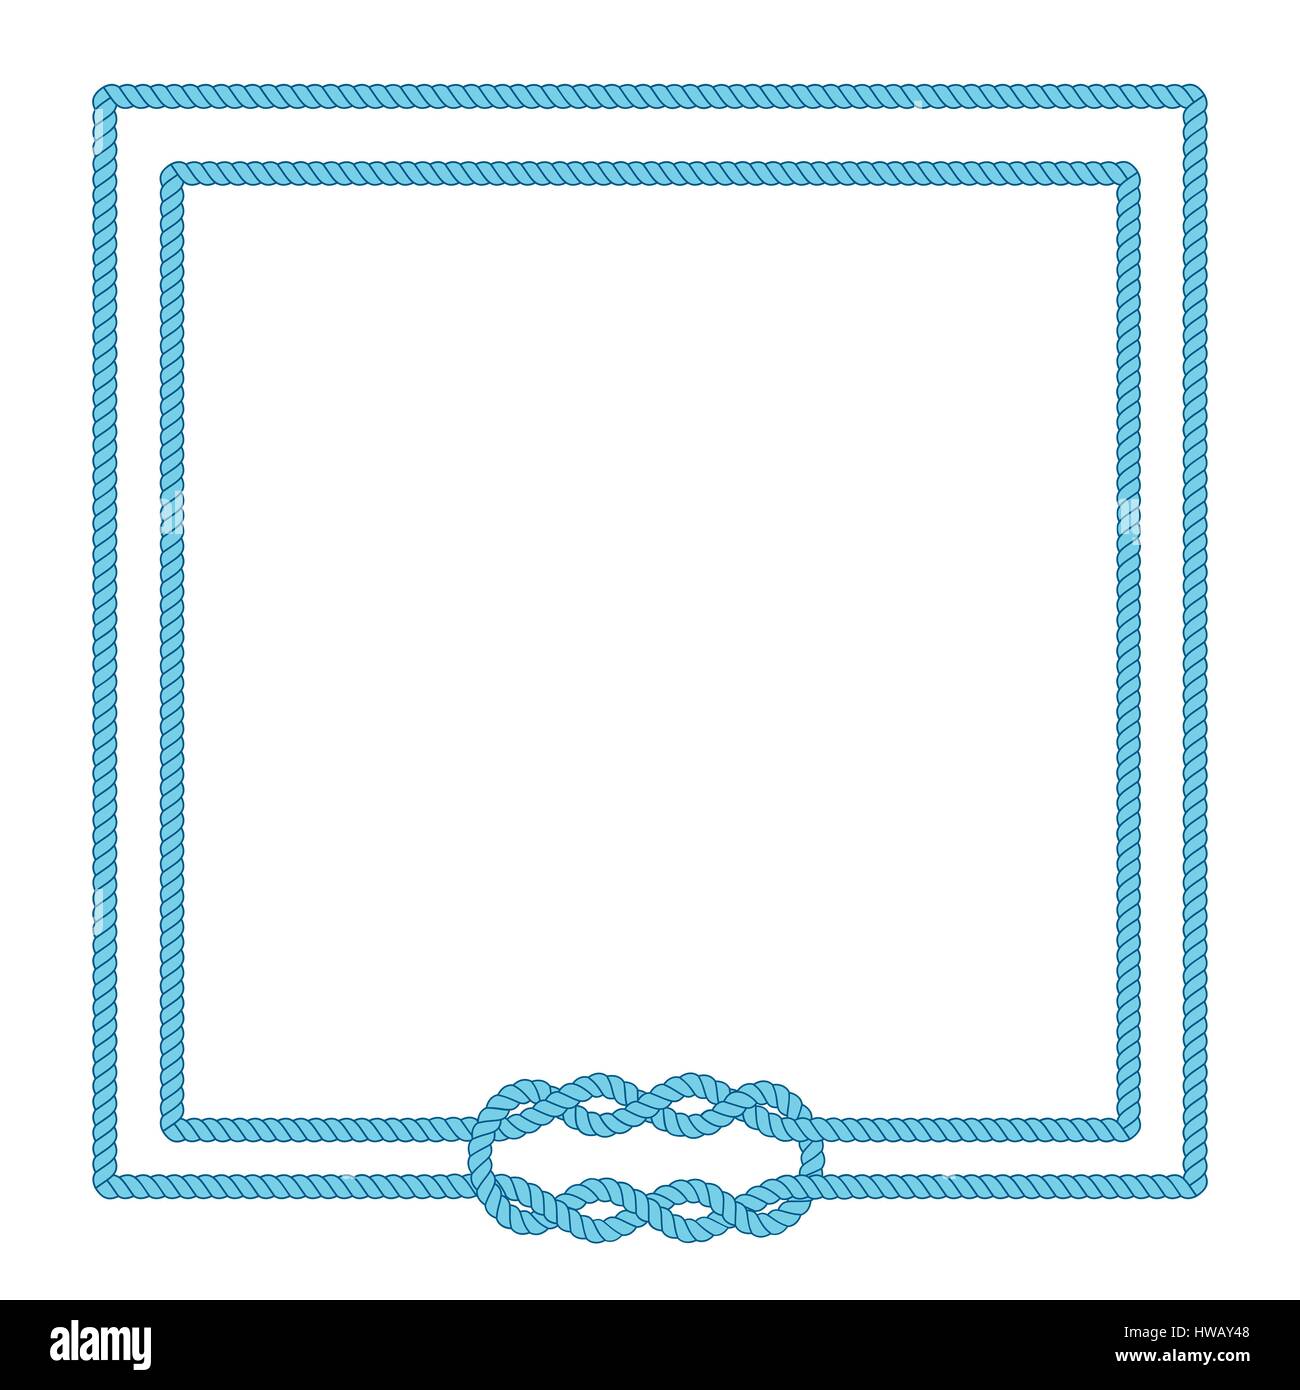 Blank poster template with nautical border Stock Vector